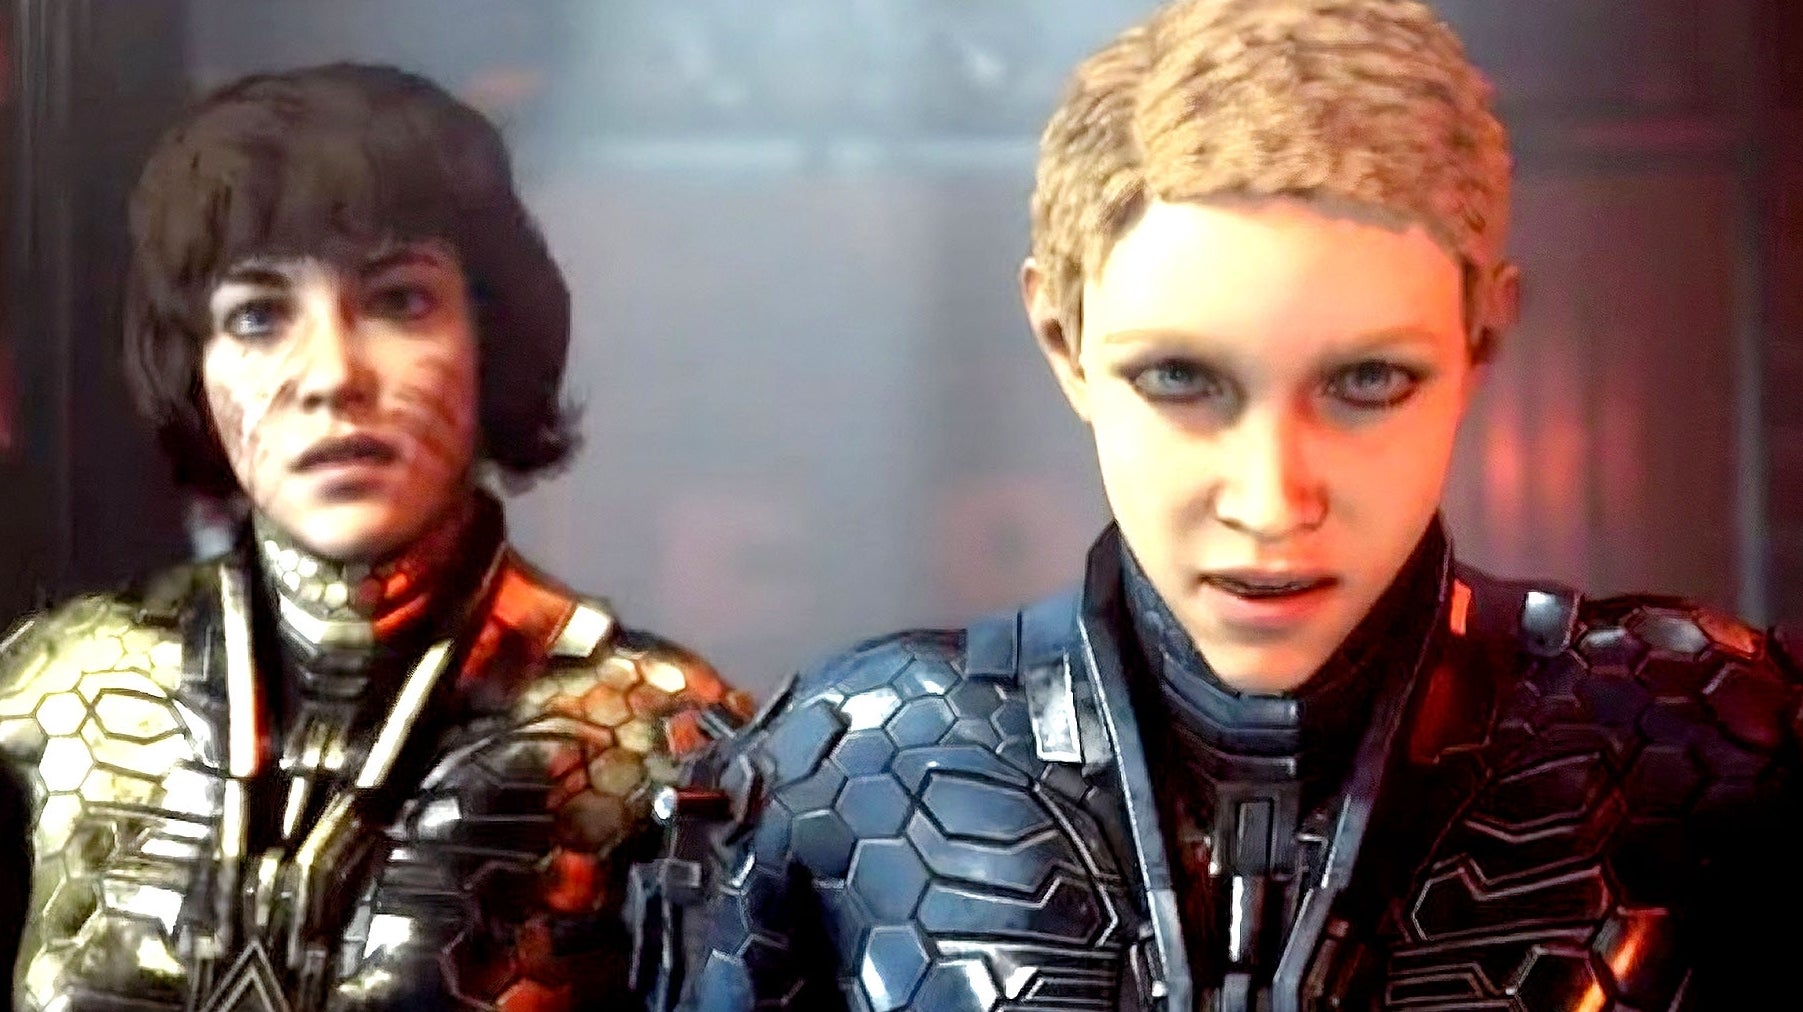 Image for Wolfenstein Youngblood gets ray tracing and VRS - is this an early preview of next-gen console features?